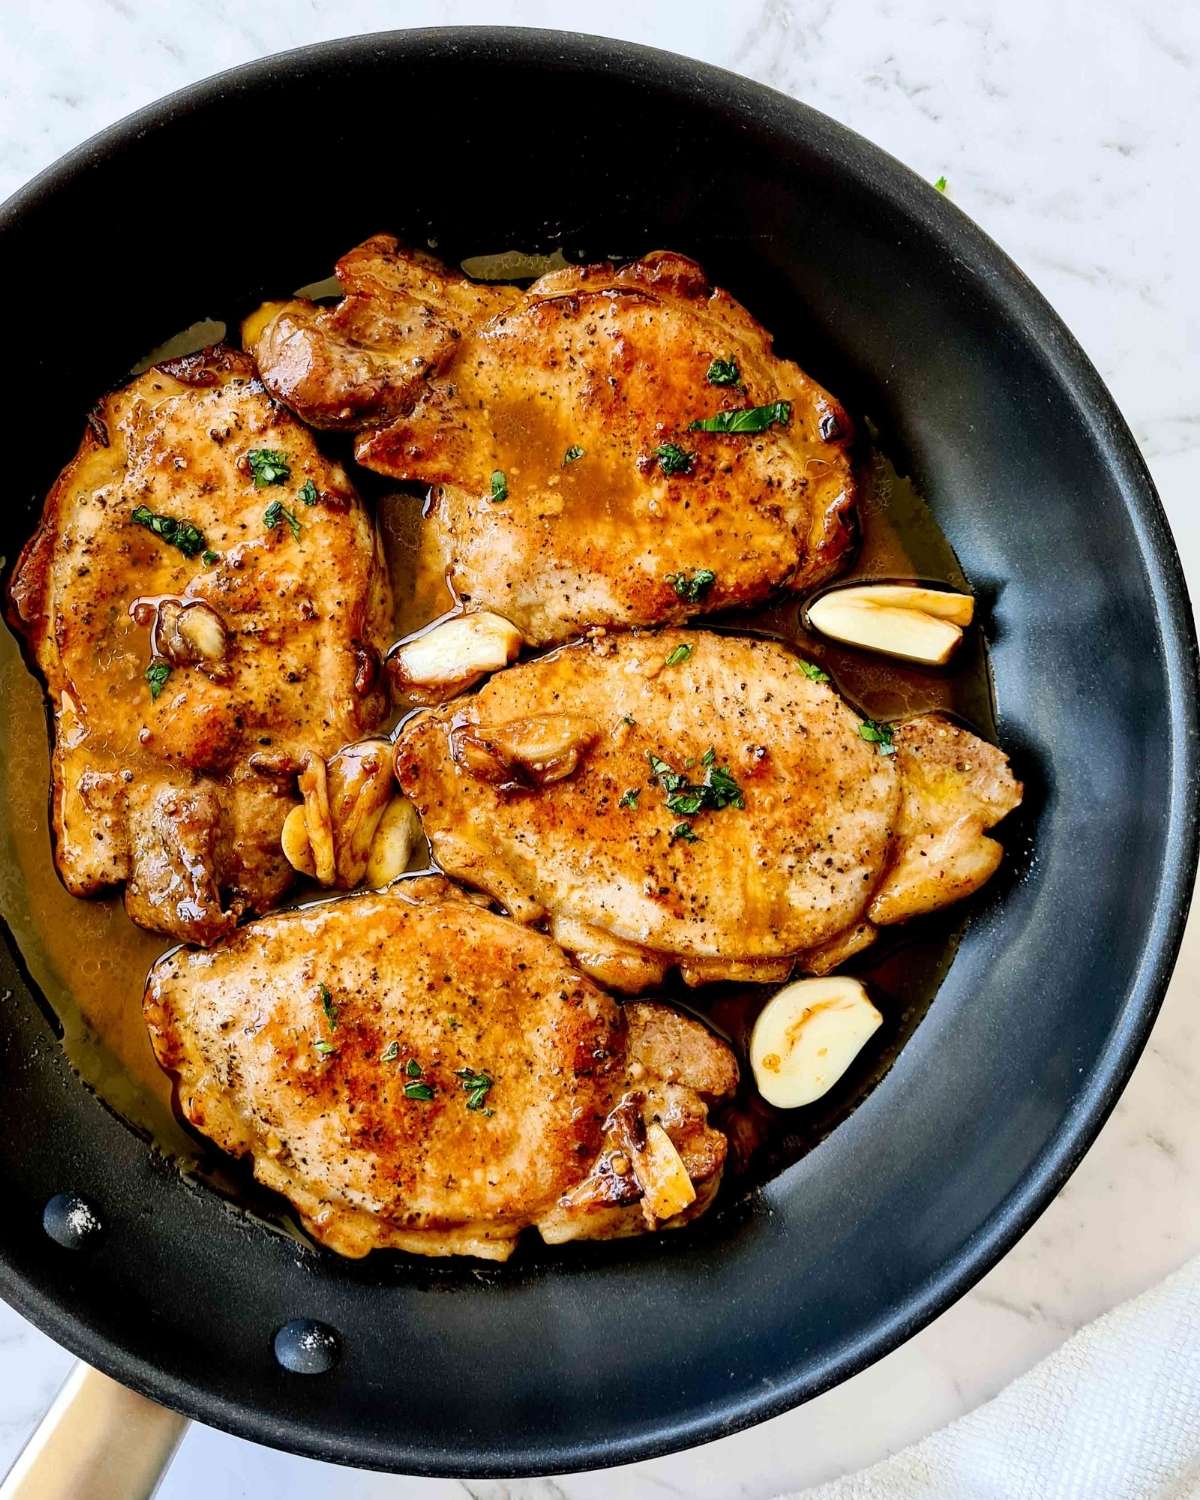 Overhead view of 4 cooked pork chops covered in garlic butter sauce in a black pan